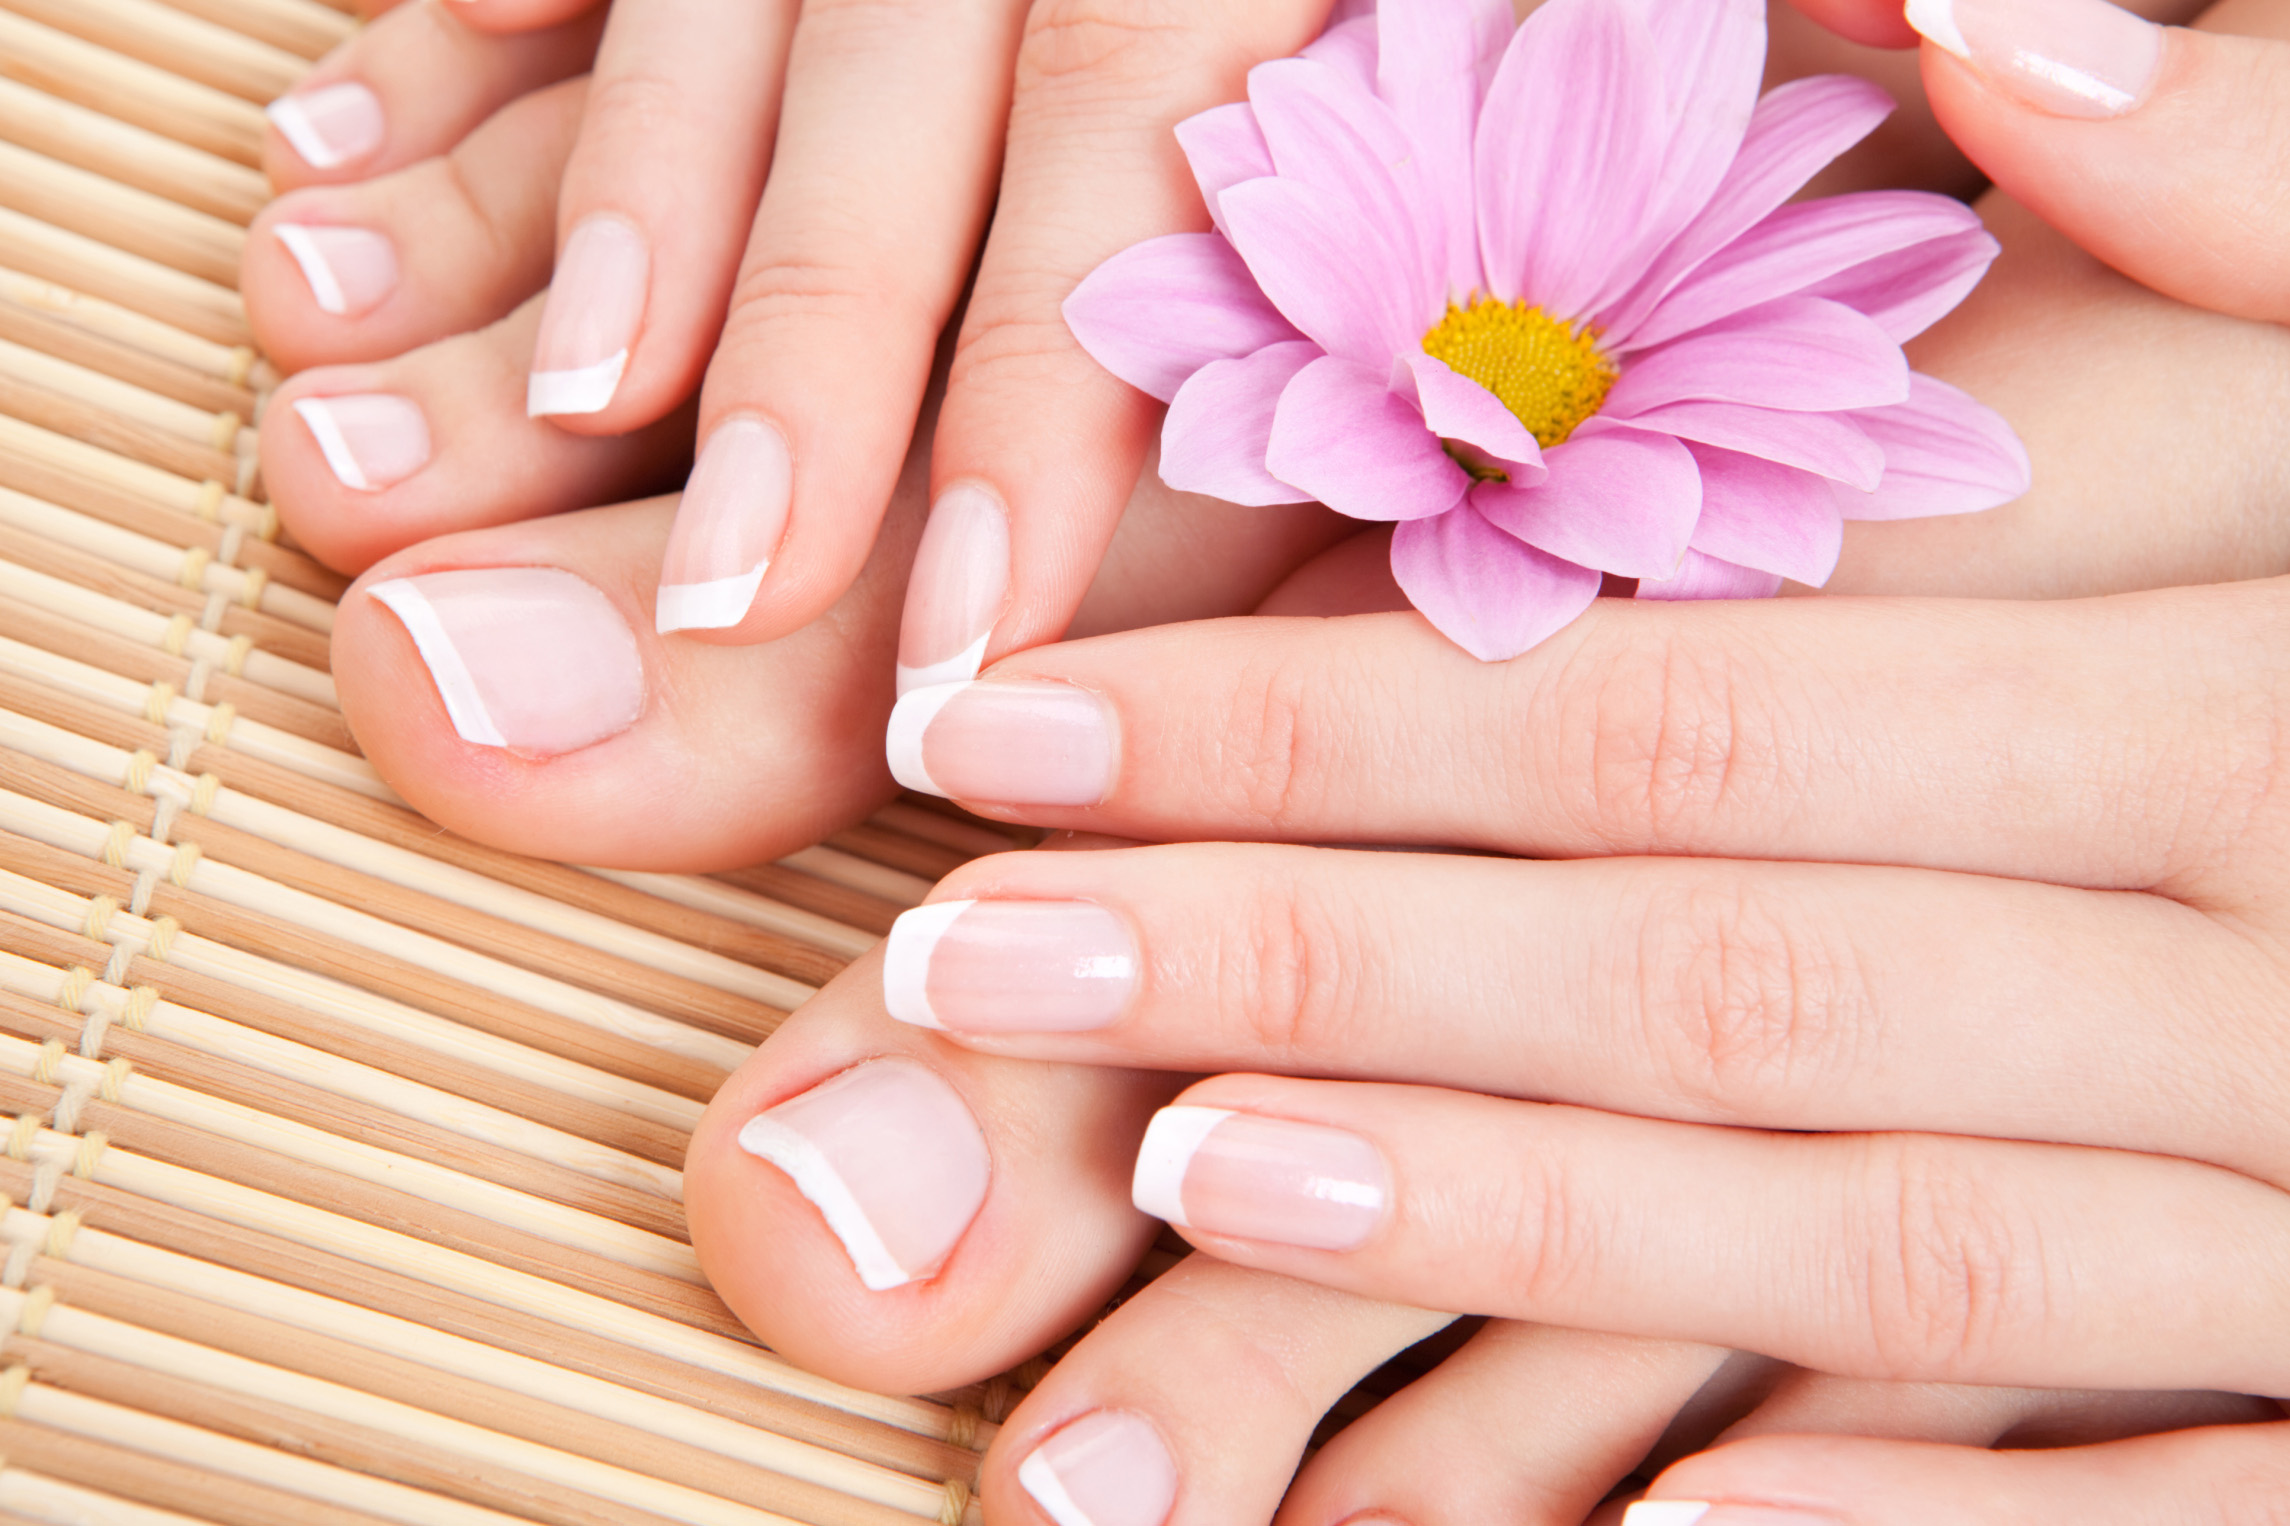 4. Dunmow Nails - Prices for Nail Design Services - wide 2